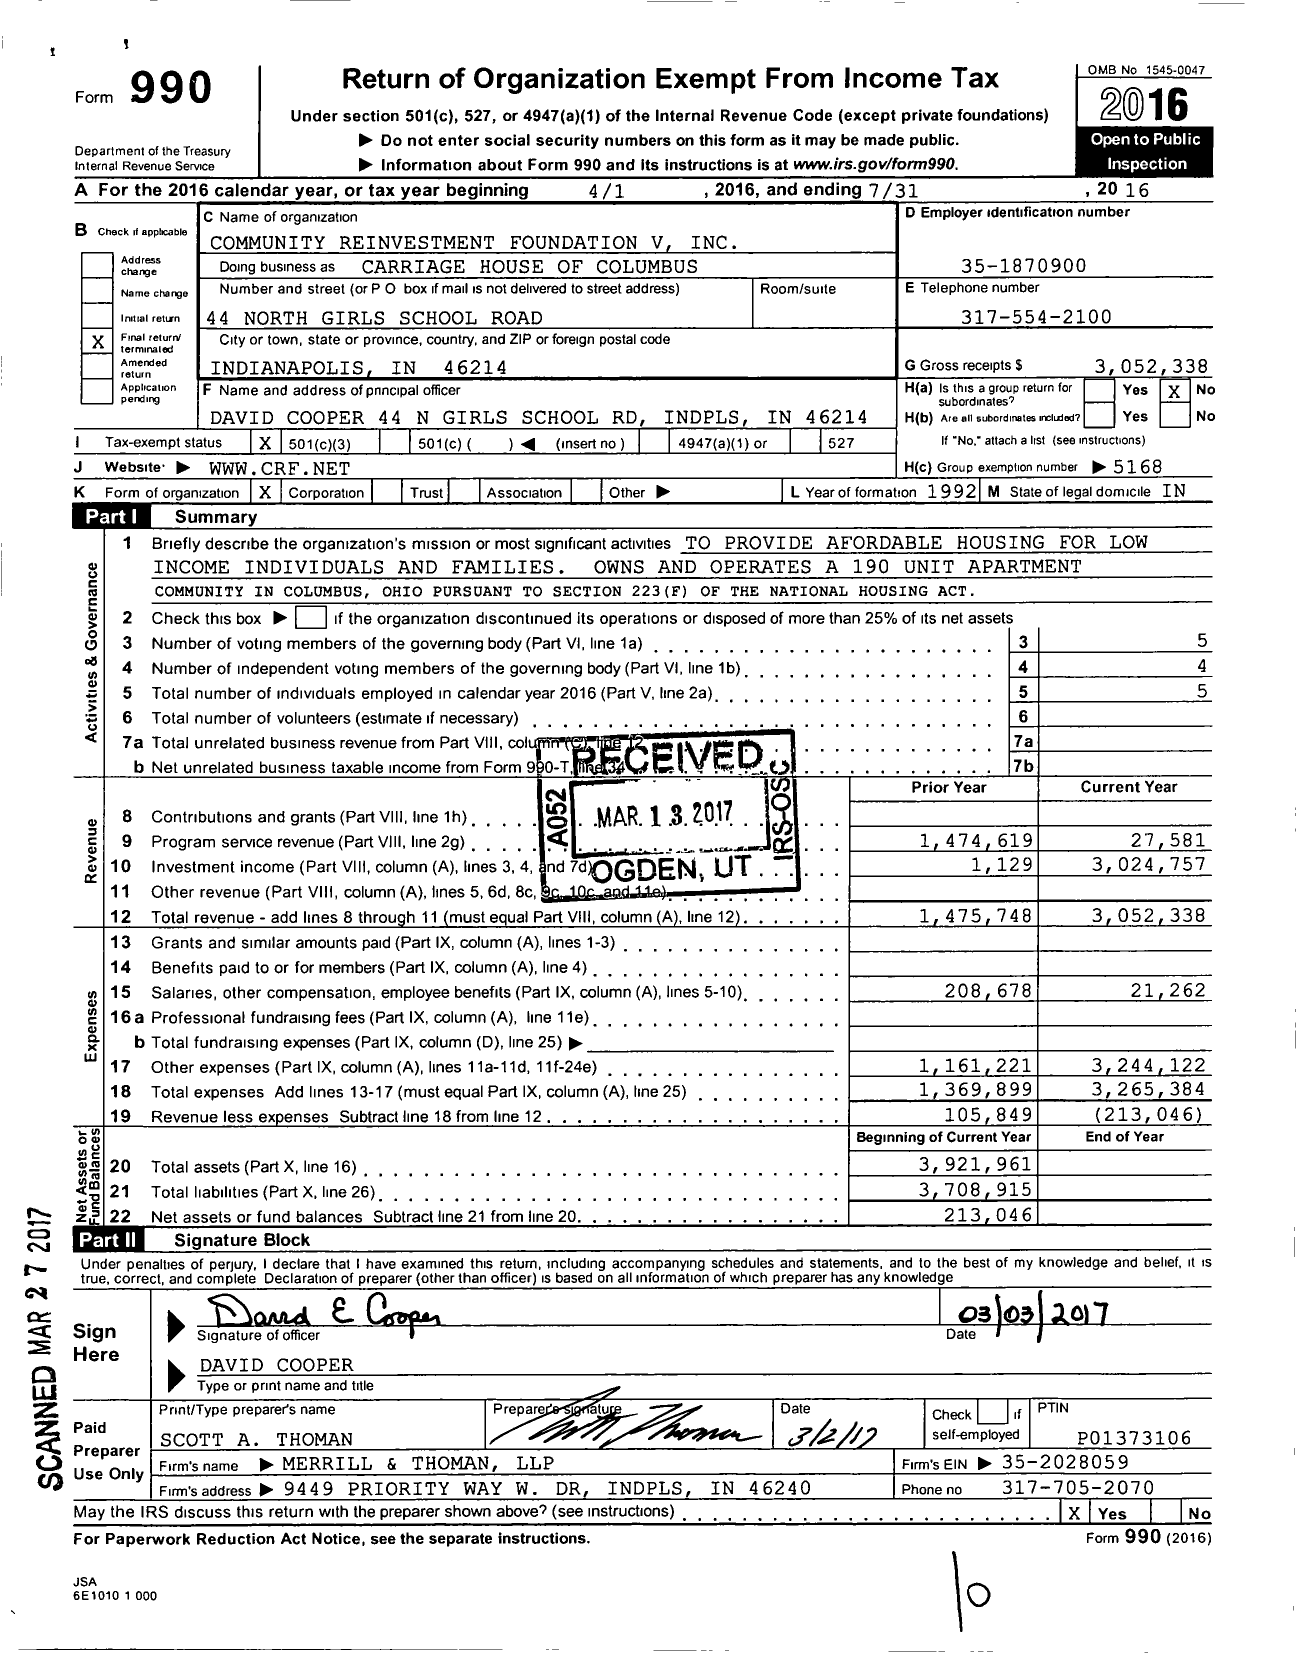 Image of first page of 2015 Form 990 for Community Reinvestment Foundation V